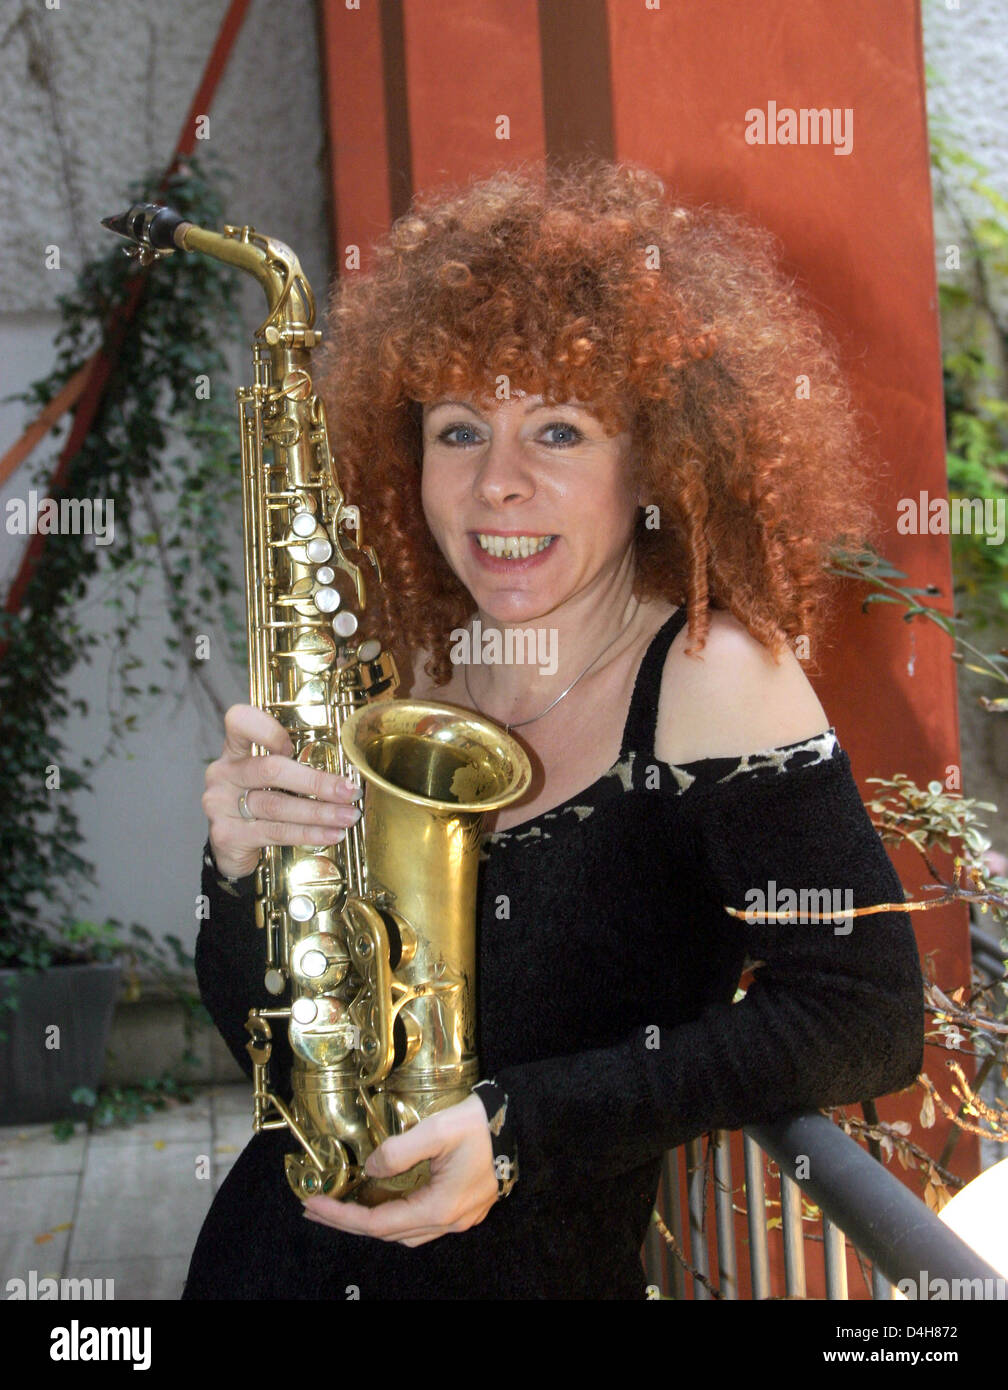 Saxophon player Tina Tandler poses during a press conference at restaurant Guy in Berlin, Germany, 05 November 2008. The upcoming jazz festival, to take place at the Palais of Berlin?s Radio Tower (Funkturm) on 29 November, was introduced during the conference. Photo: Xamax Stock Photo